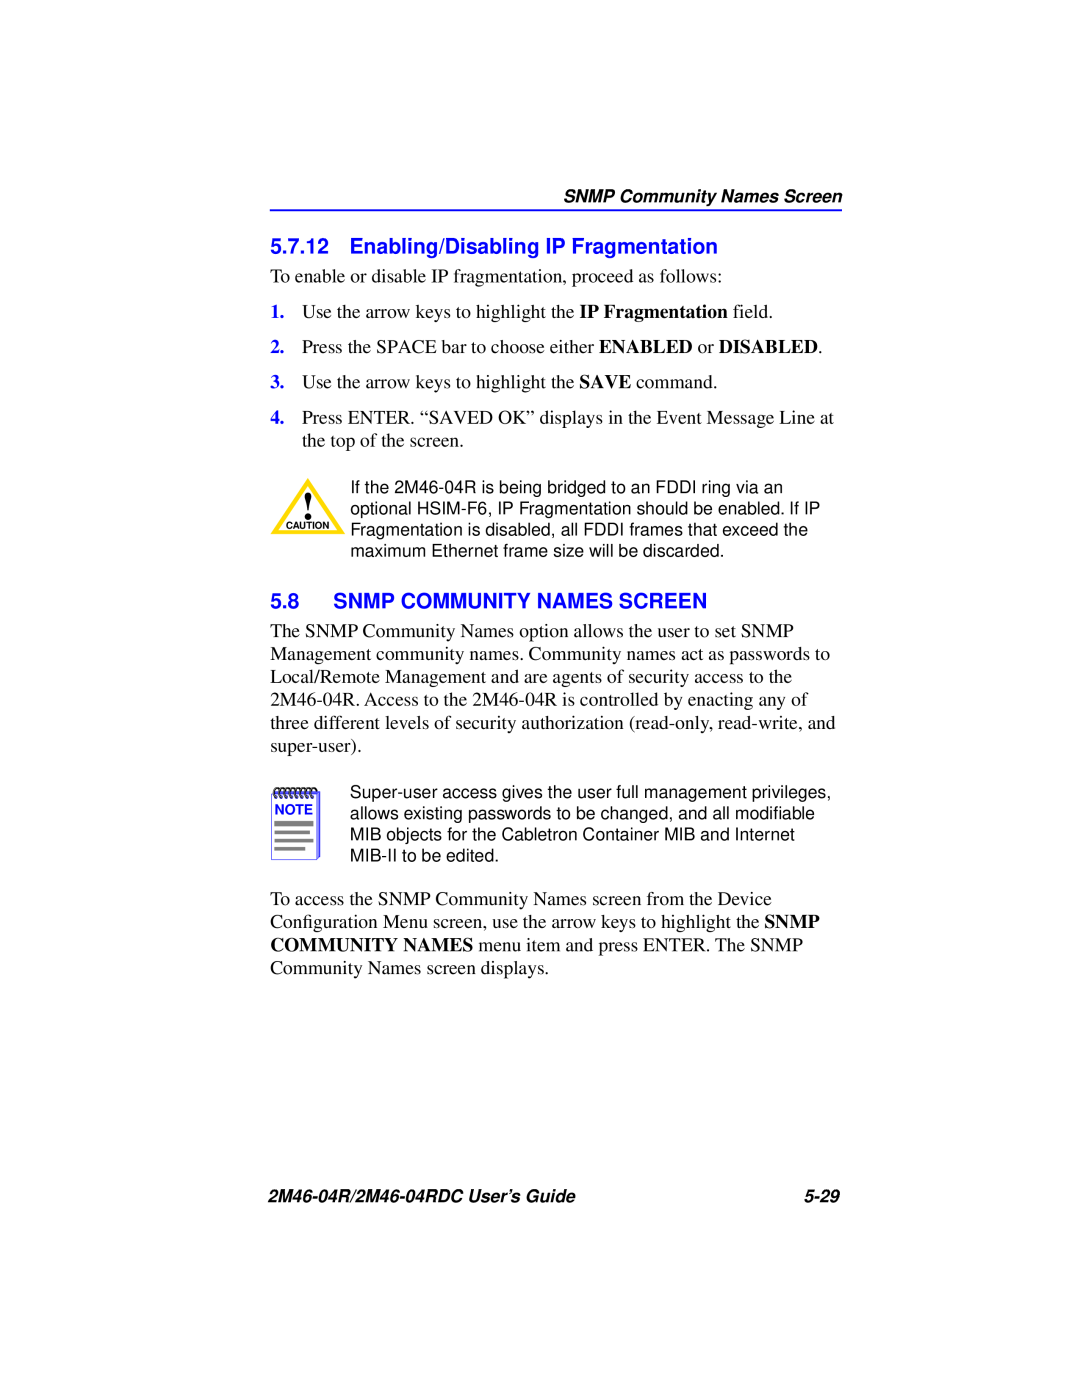 Cabletron Systems pmn manual Enabling/Disabling IP Fragmentation, Snmp Community Names Screen 